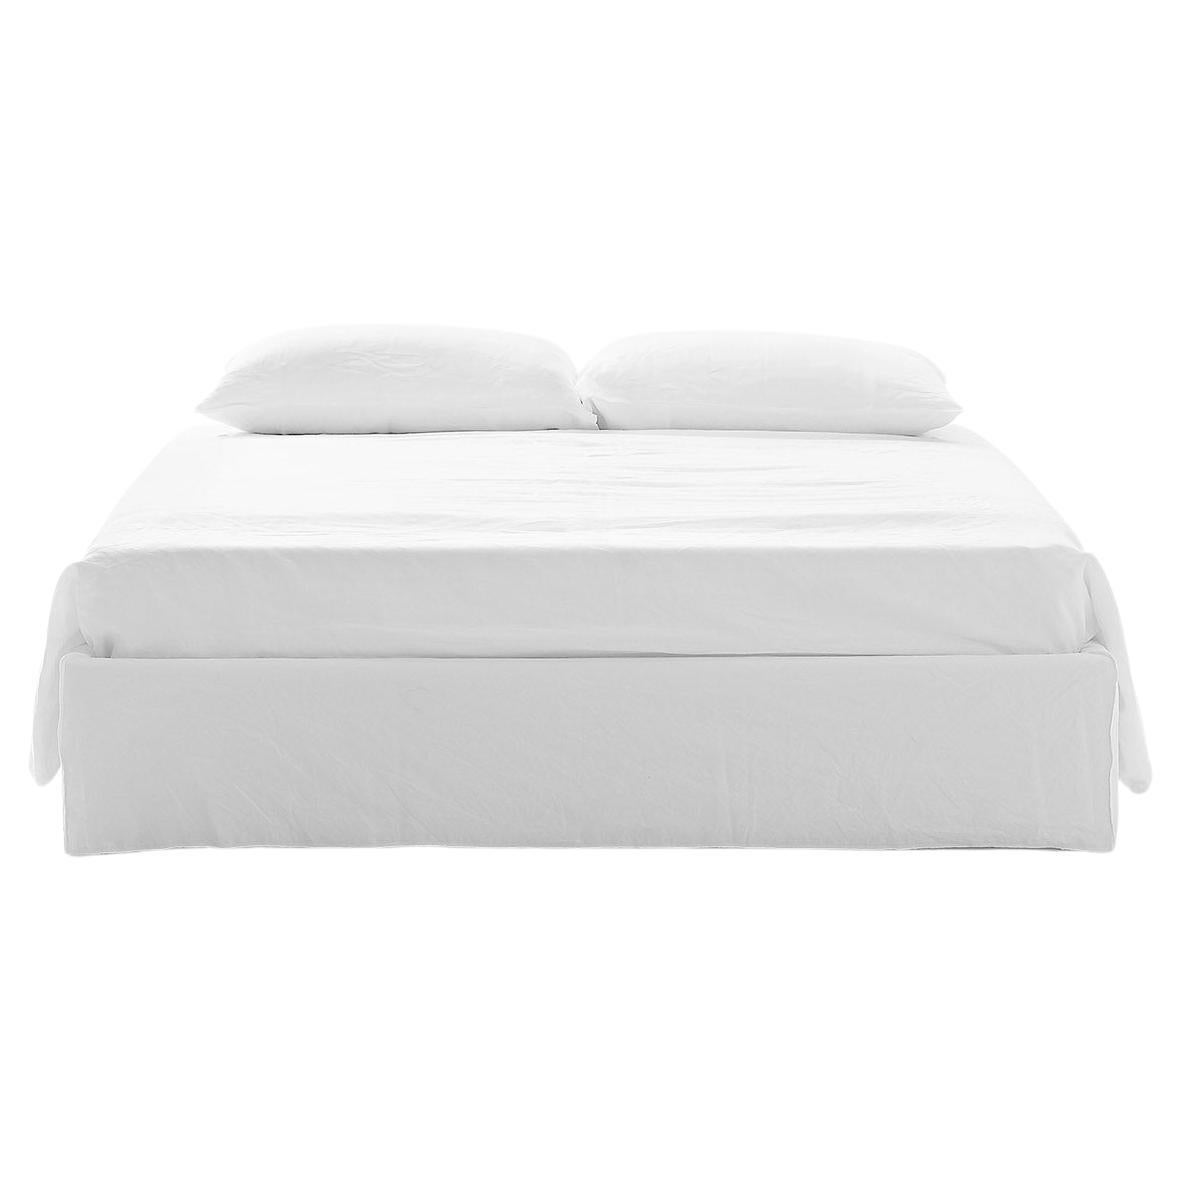 Gervasoni Ghost 80 FL Bed in White Linen Upholstery by Paola Navone